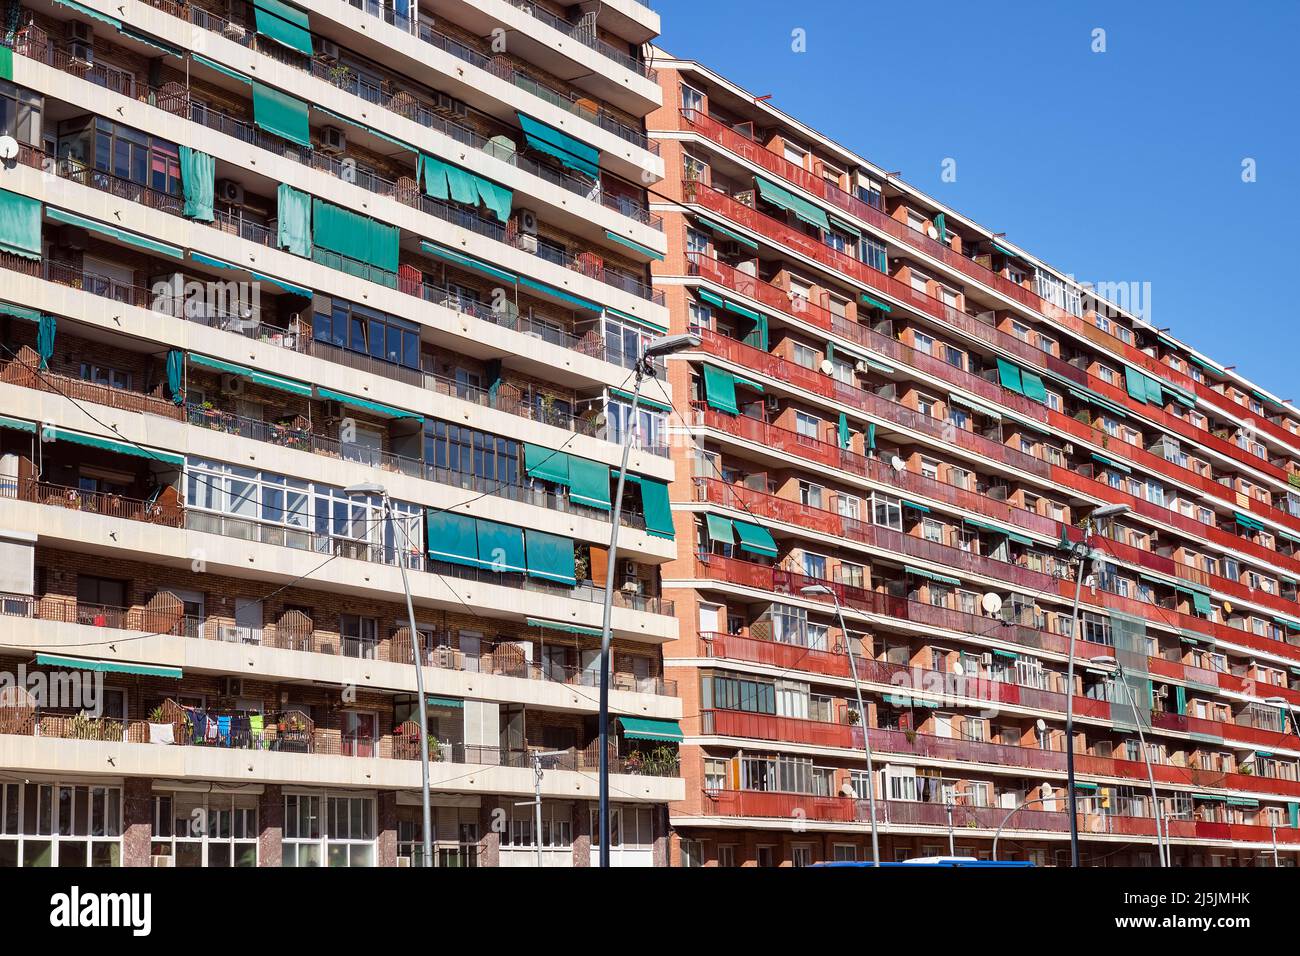 Large apartment buildings seen in Barcelona, Spain Stock Photo